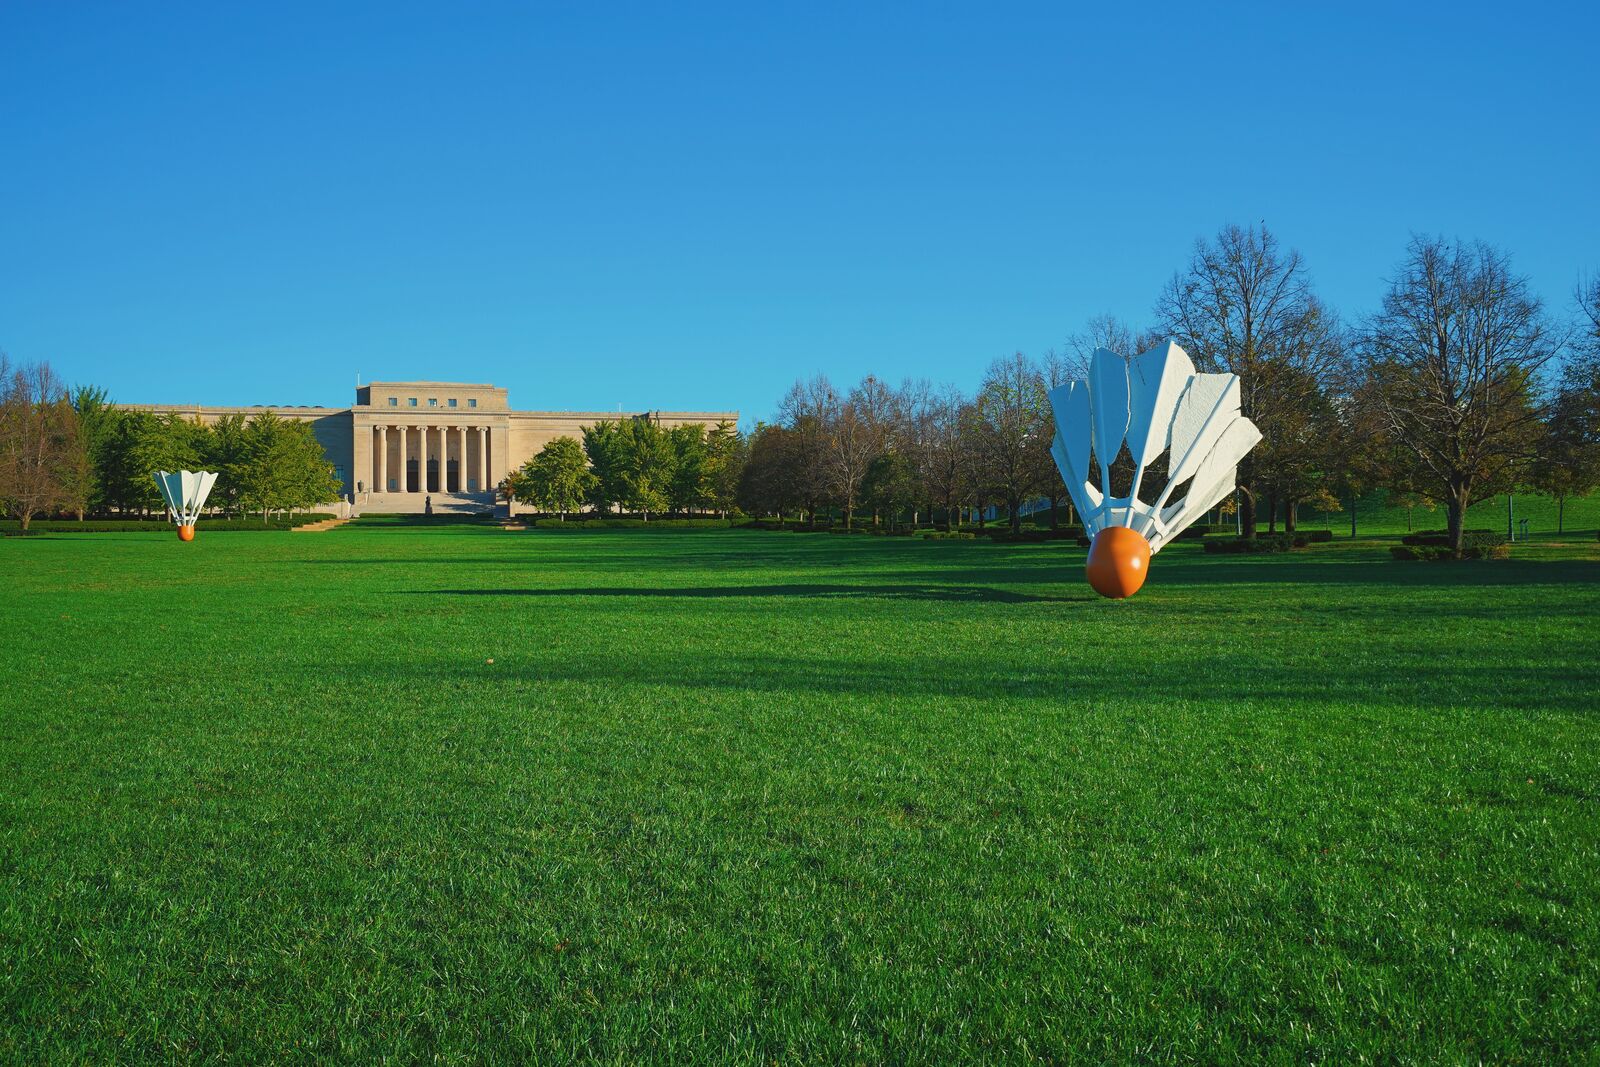 The Nelson-Atkins Museum of Art has an encyclopedic collection